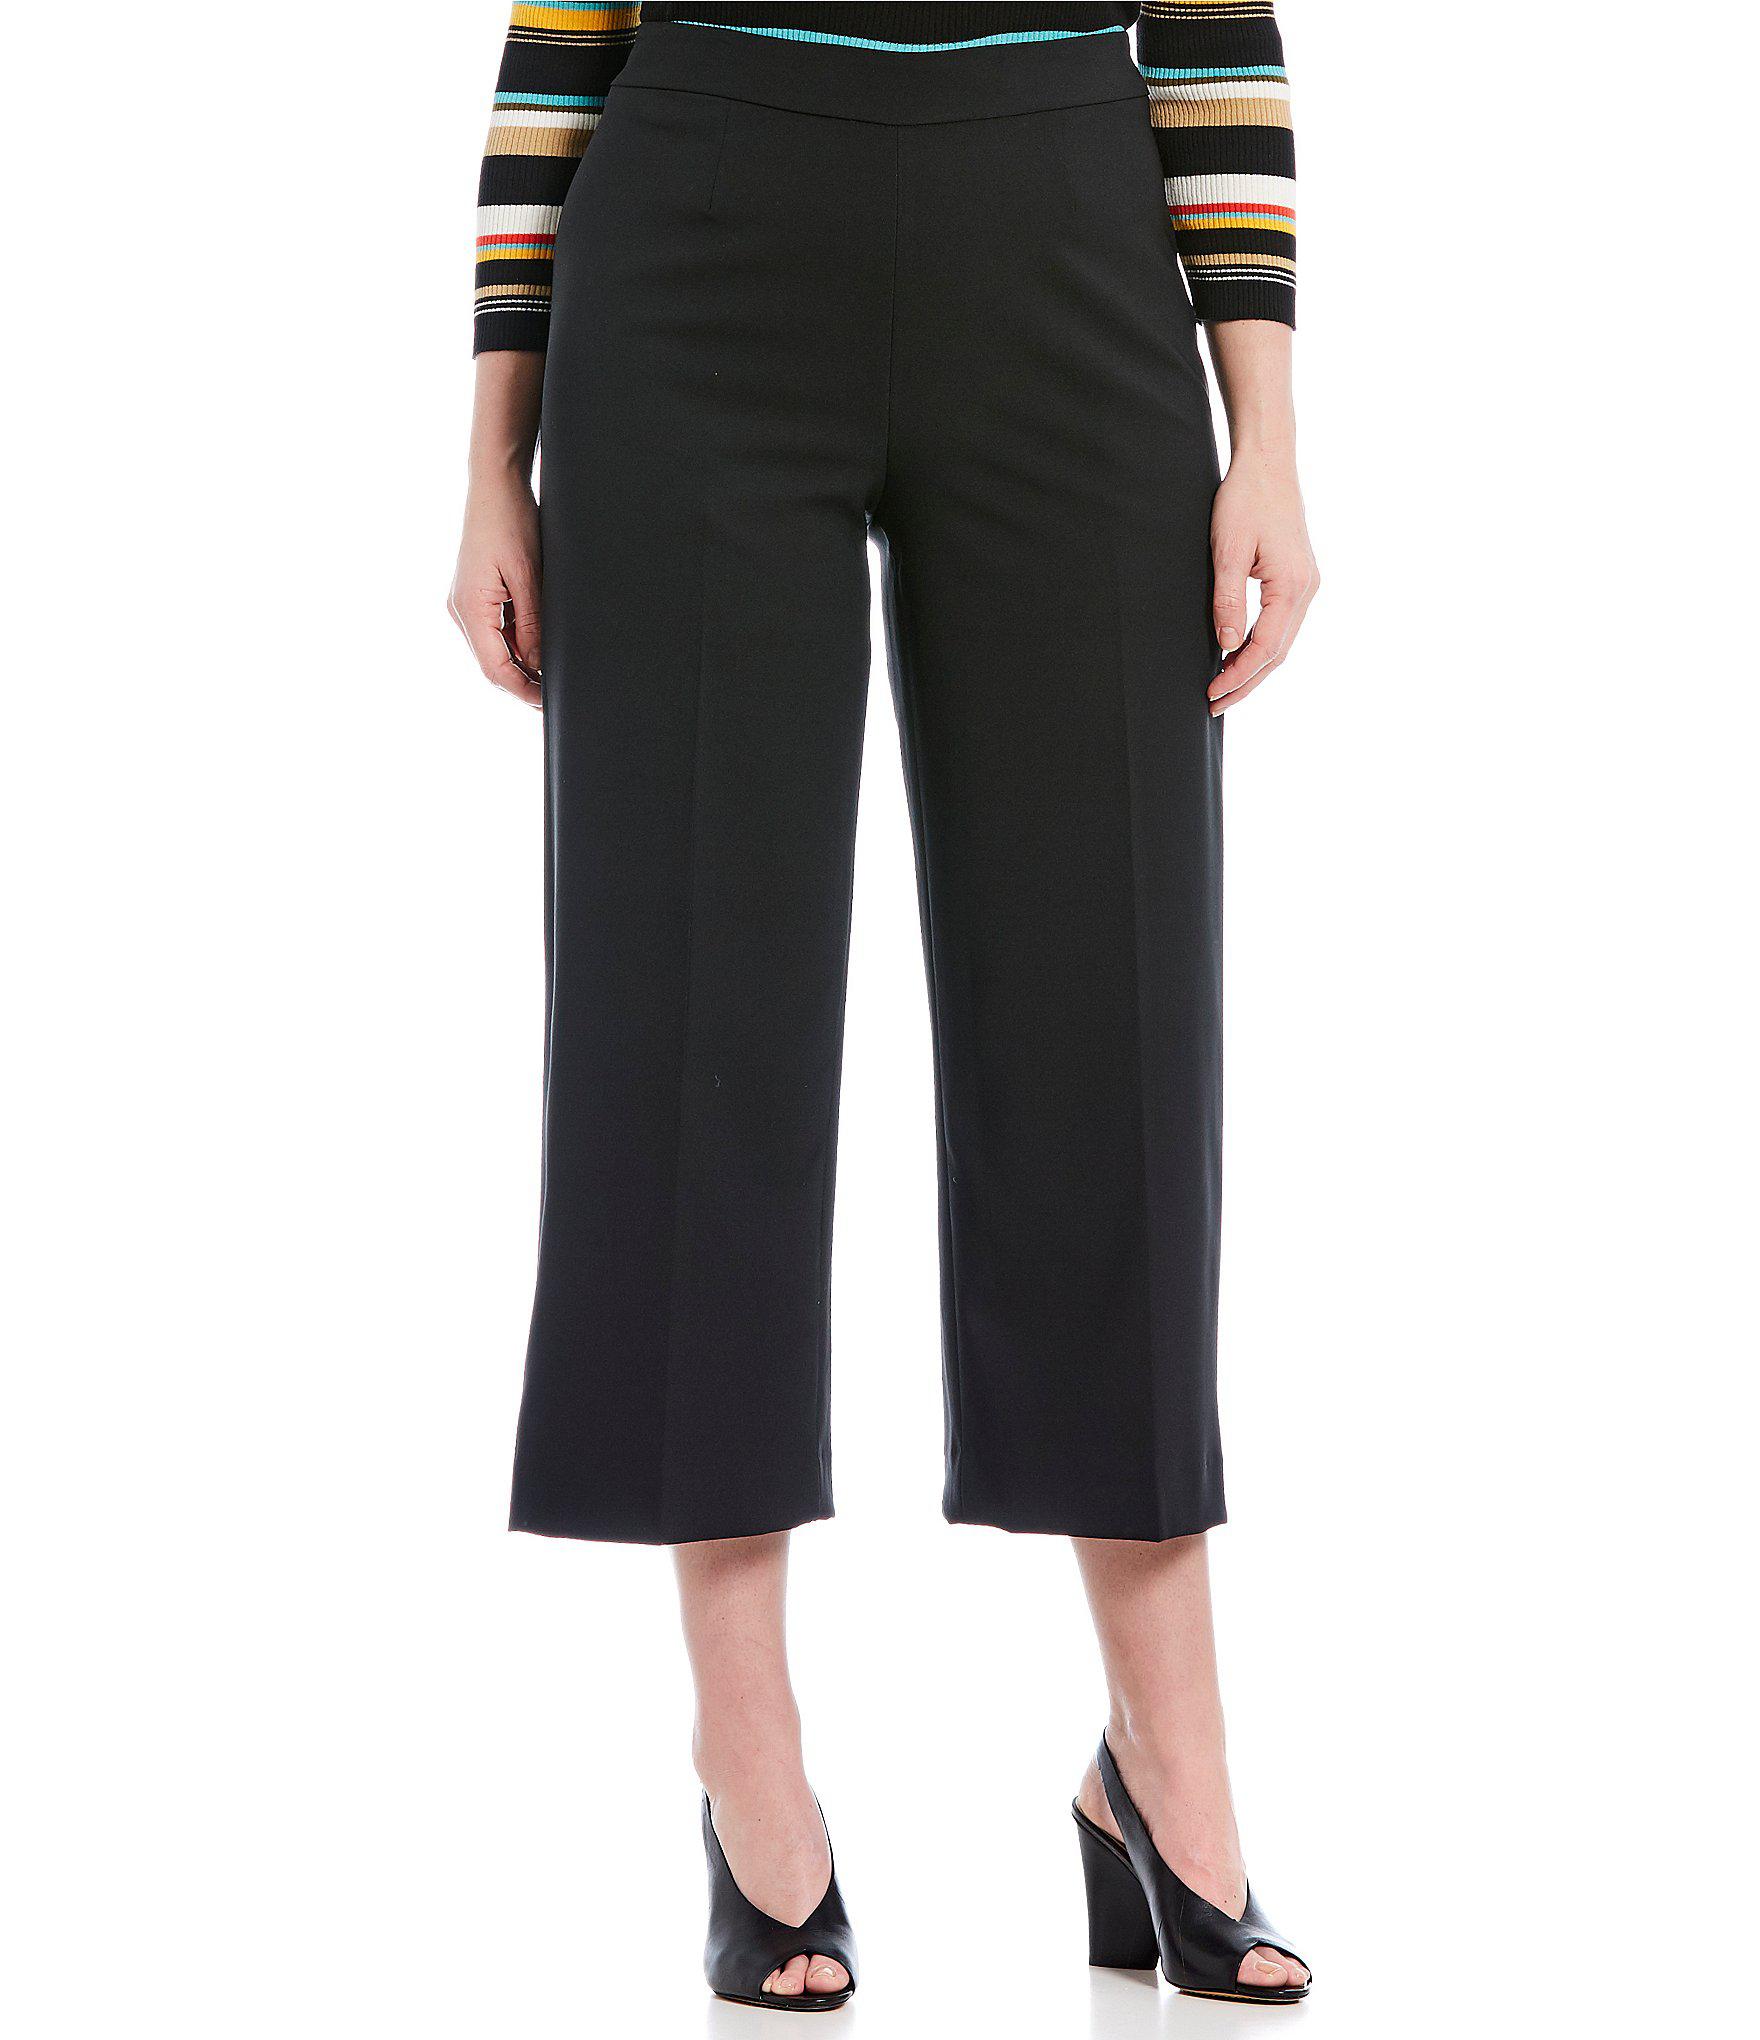 Lyst - Vince Camuto Plus High Waisted Cropped Culotte Pant in Black